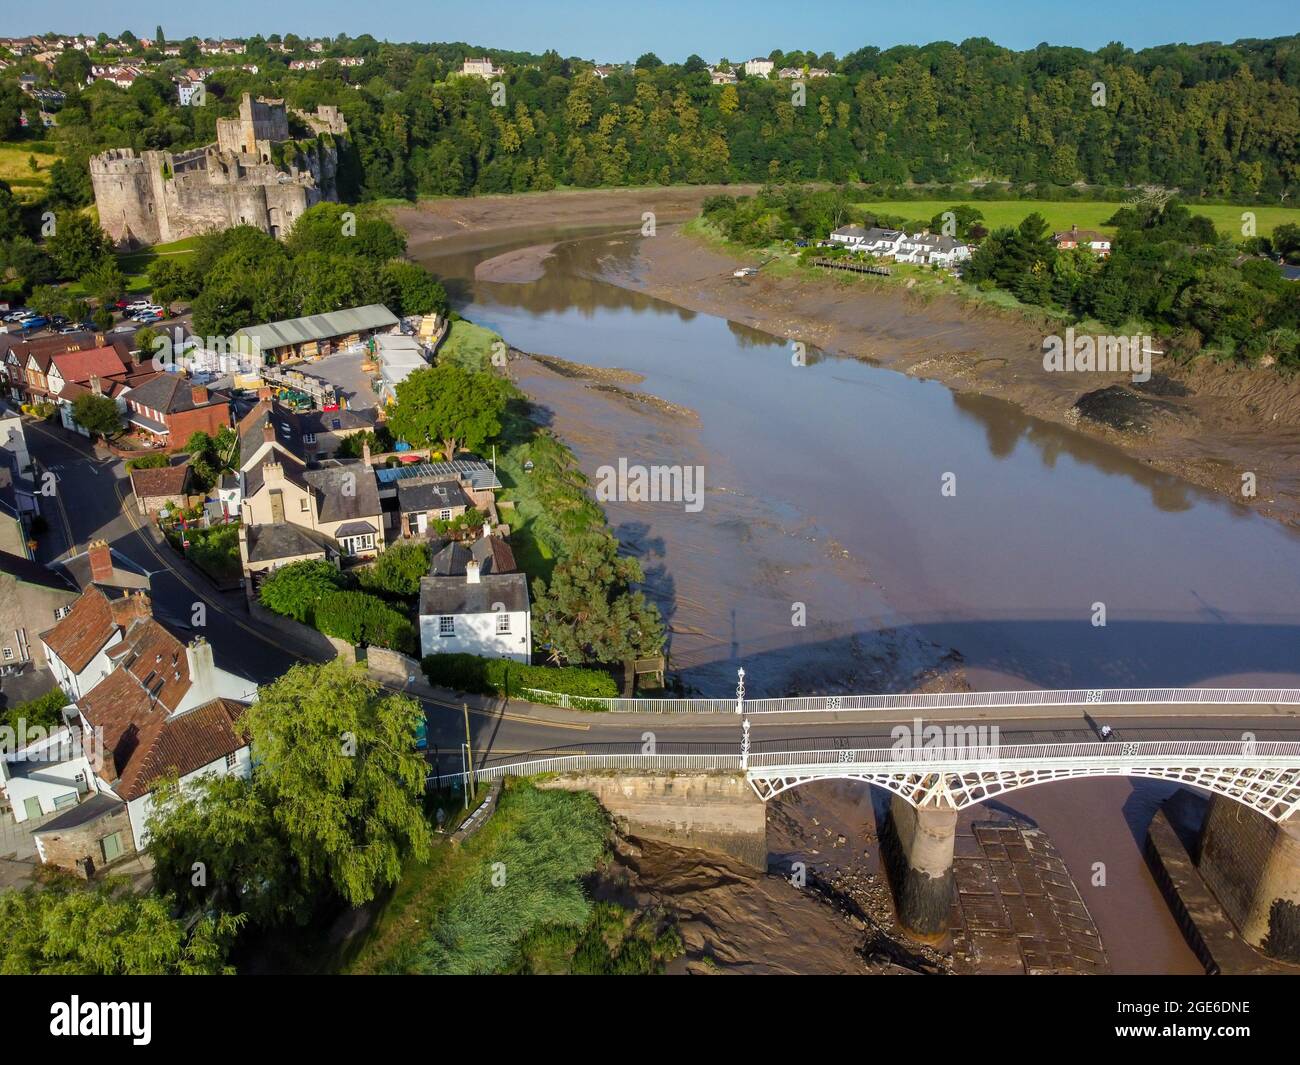 Chepstow's Norman castle and bridge across the border and river Wye to England, Chepstow, Wales Stock Photo